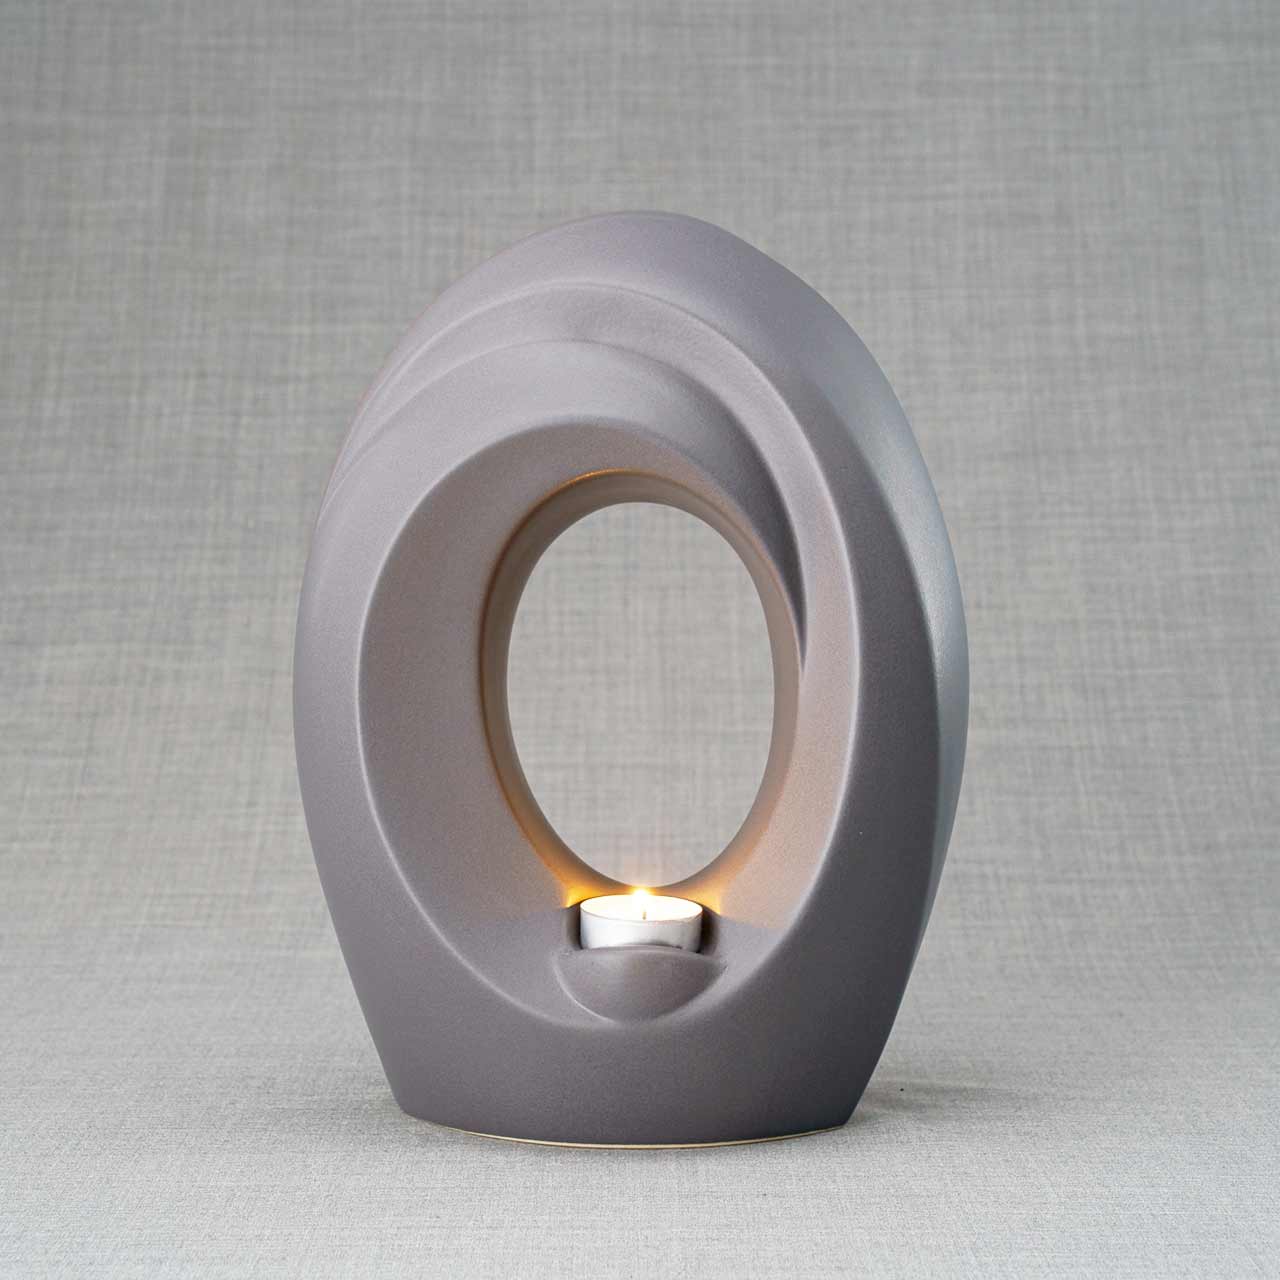 The Passage Adult Cremation Urn for Ashes in Matte Grey